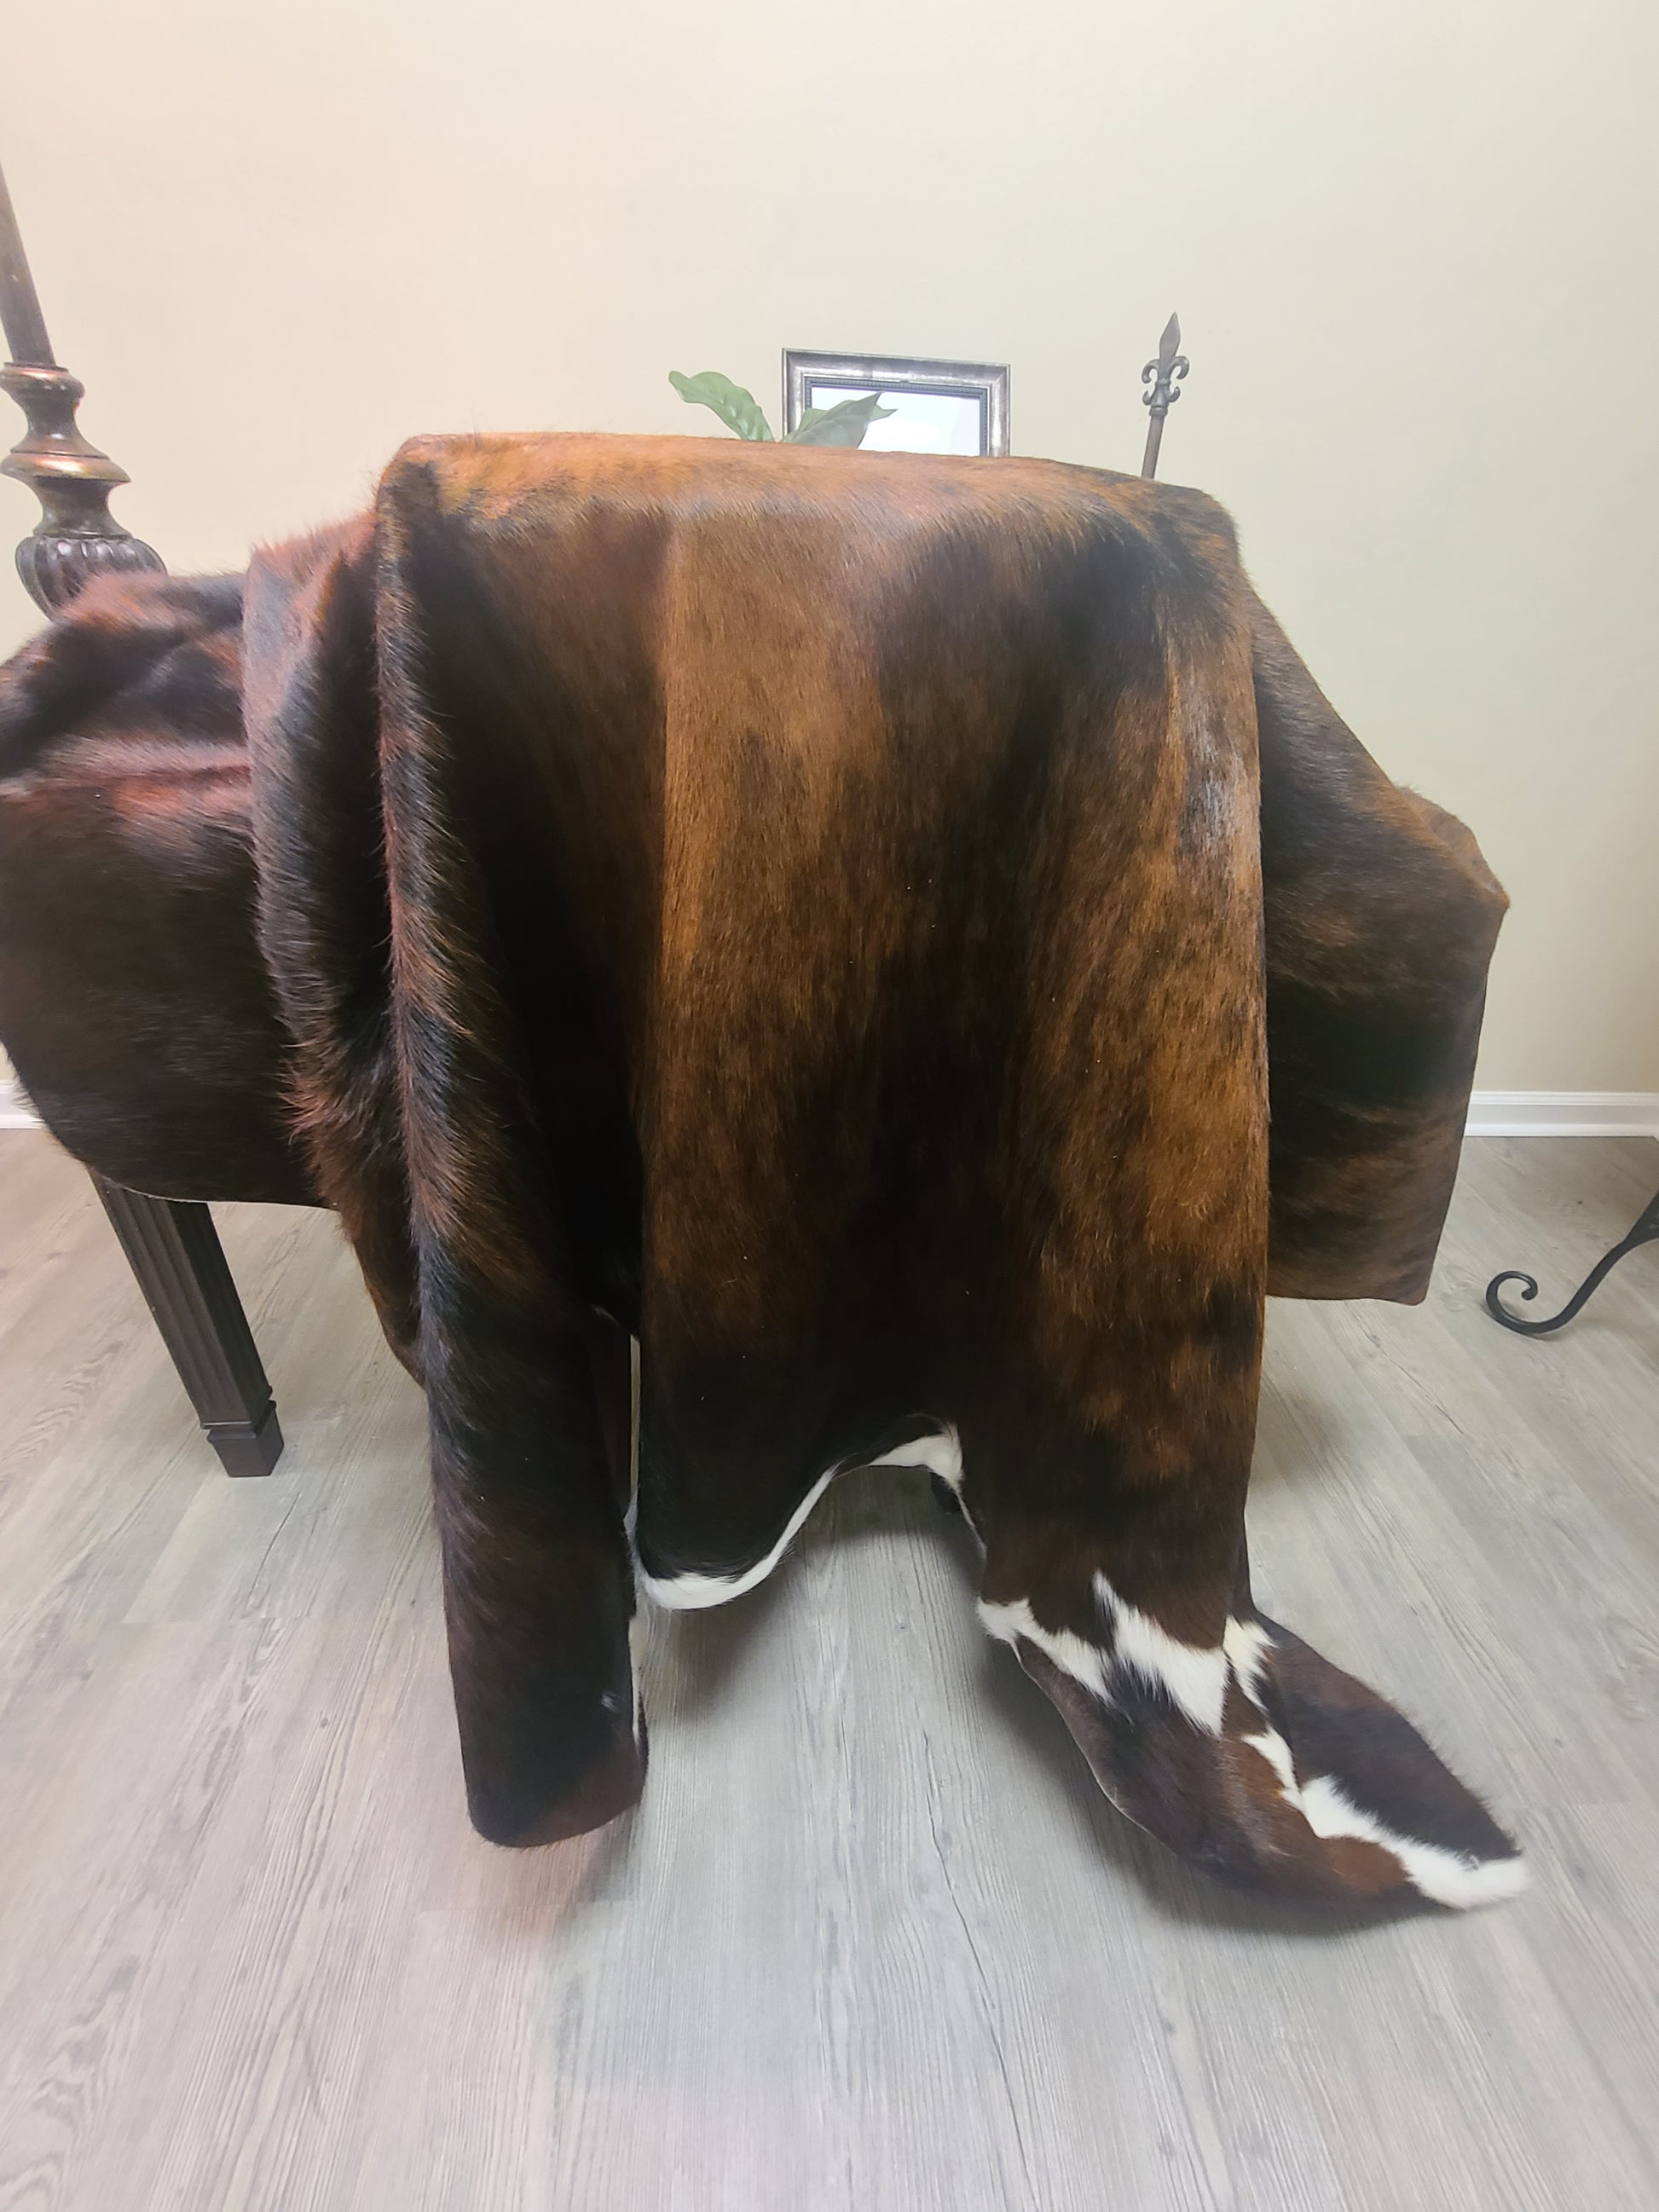 Brazilian Cowhide Rug - Dark White Belly Brindle - 8 ft x 6 ft-Status Co. Leather Studio